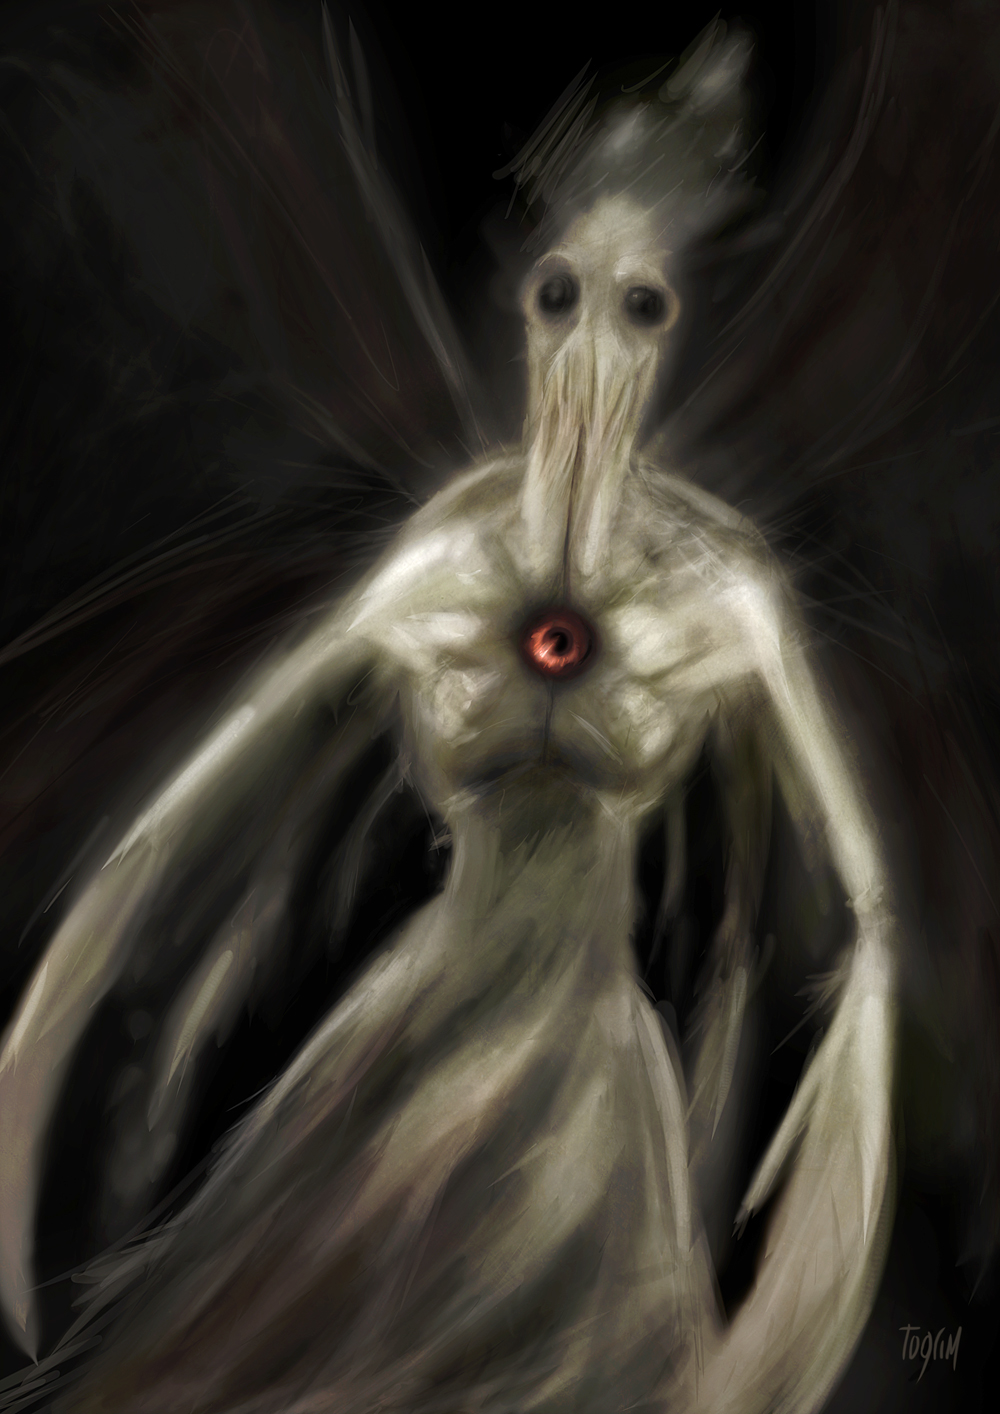 digital painting ghost dark obscure horror Character monster fog speed painting eye red lovecraft